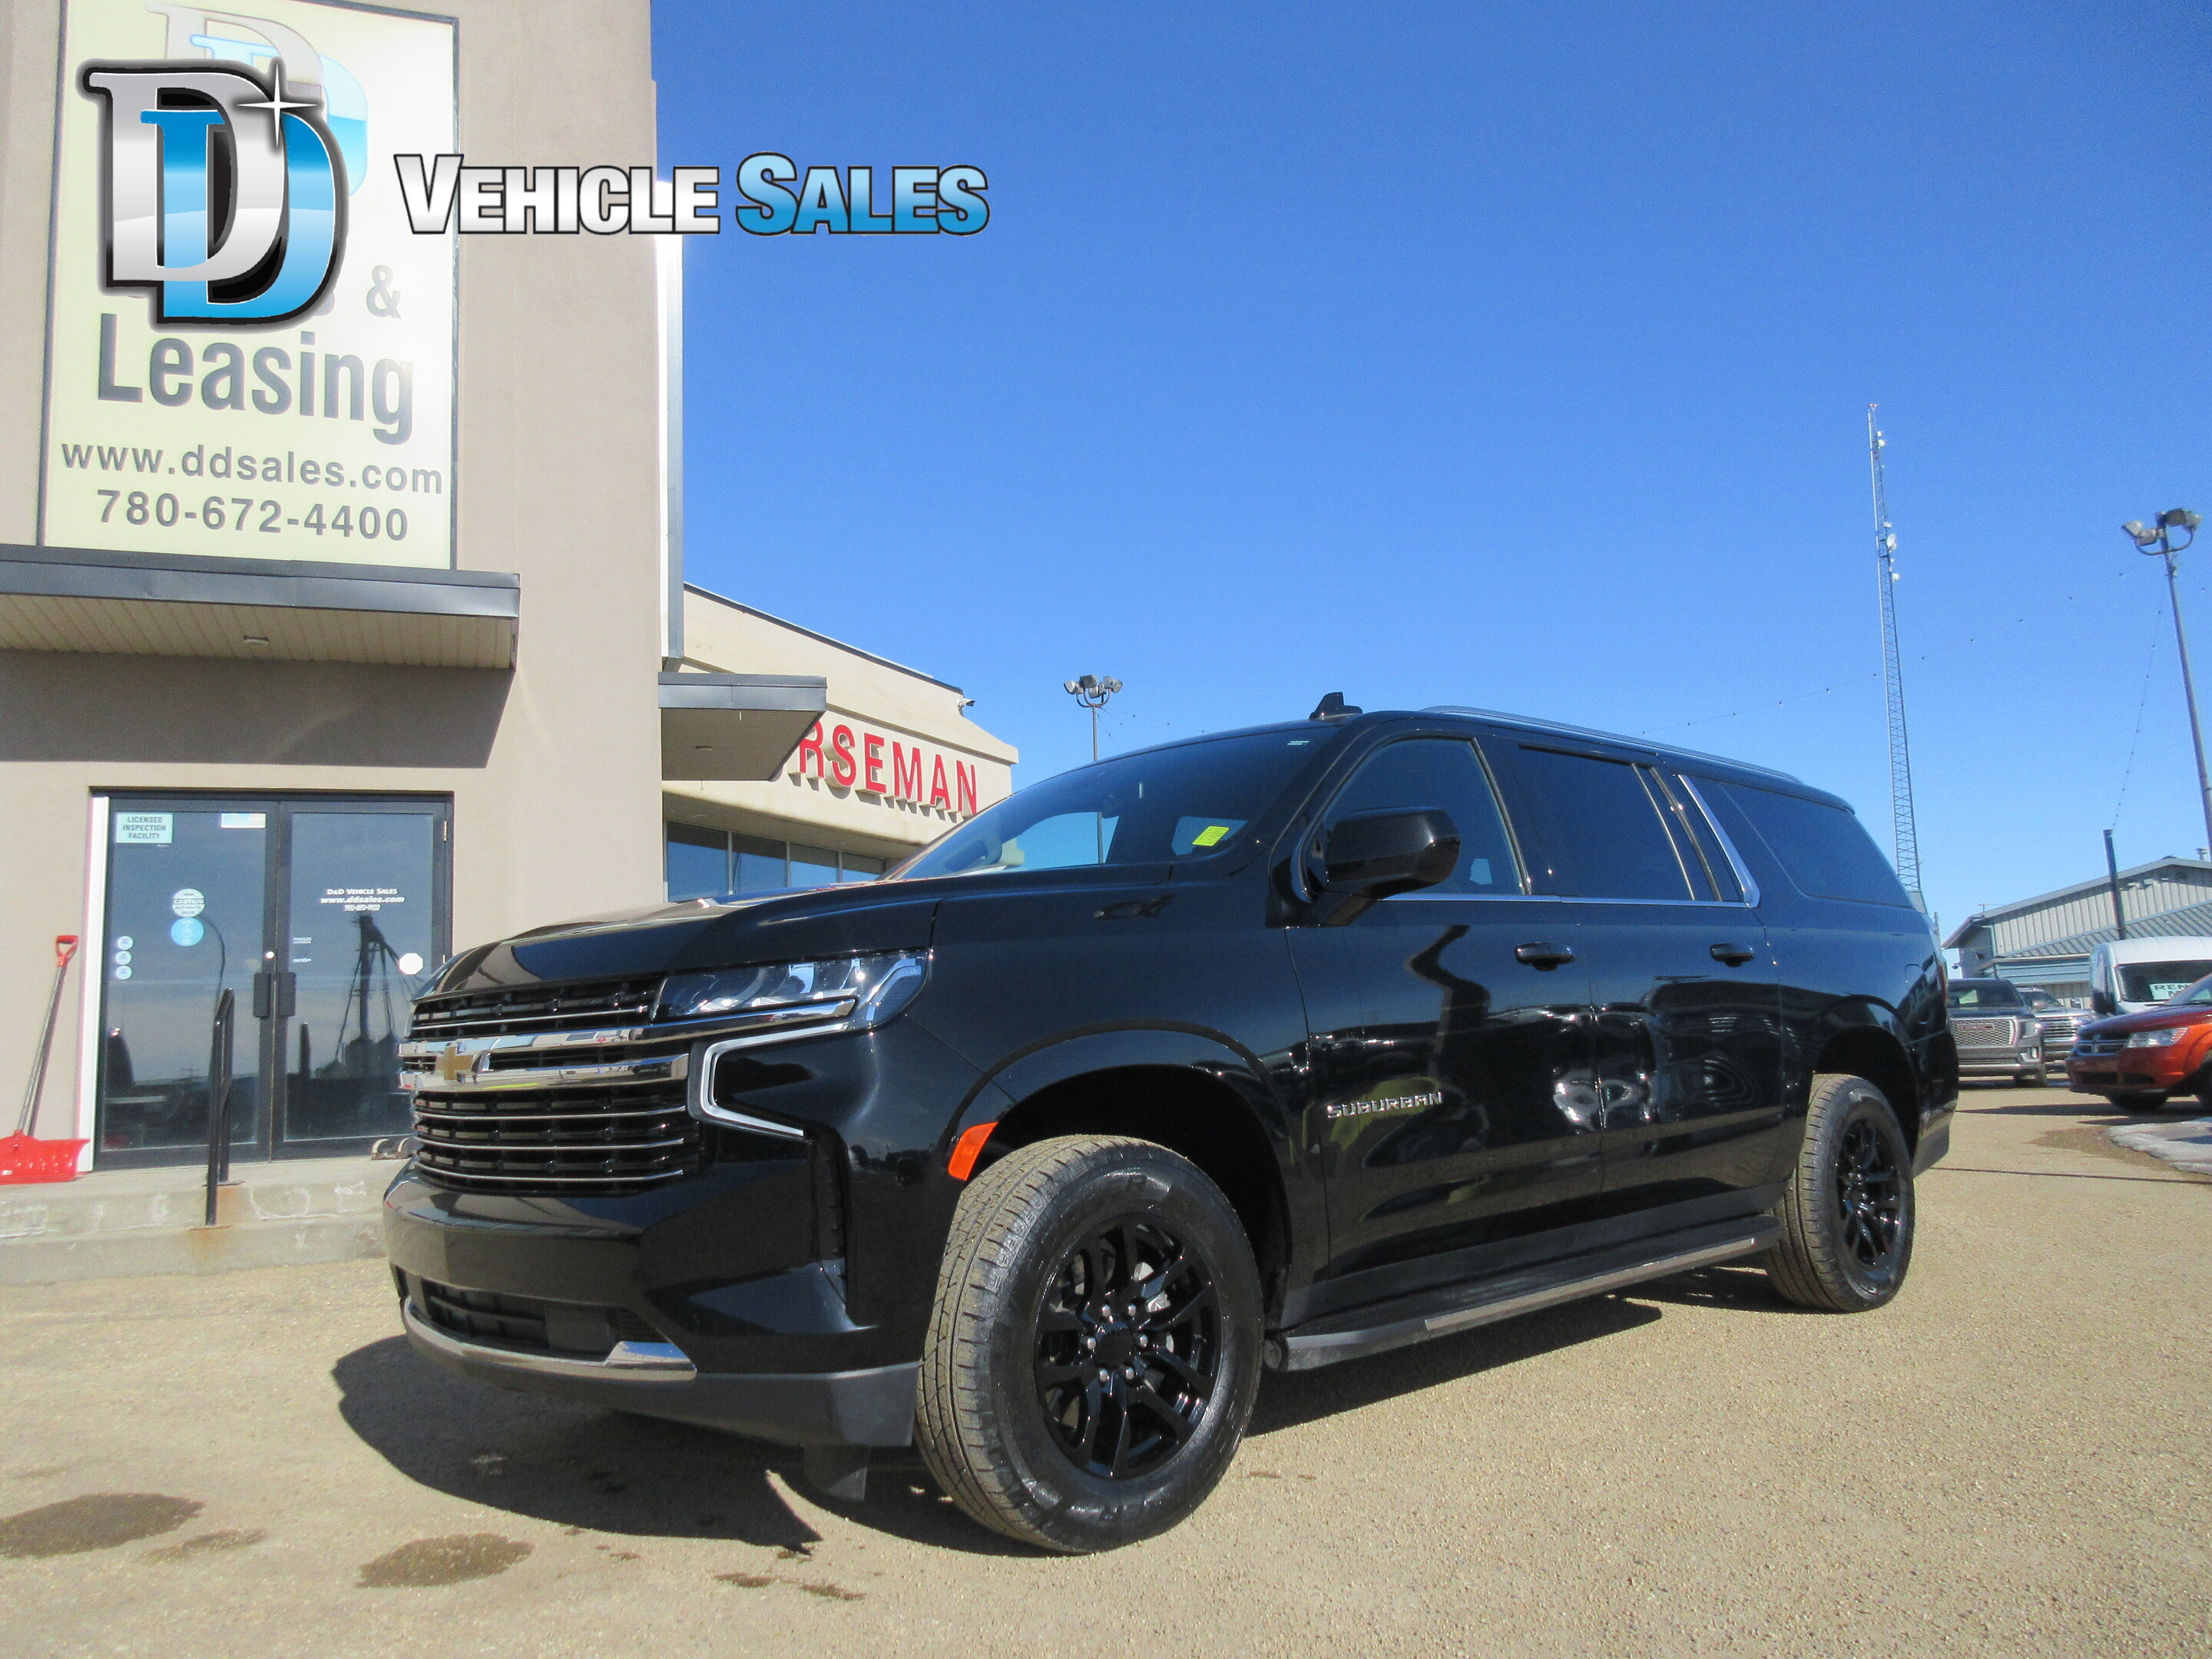 2021 Chevrolet Suburban LT/8 Pass/Leather/Backup Cam - NO CREDIT CHECK